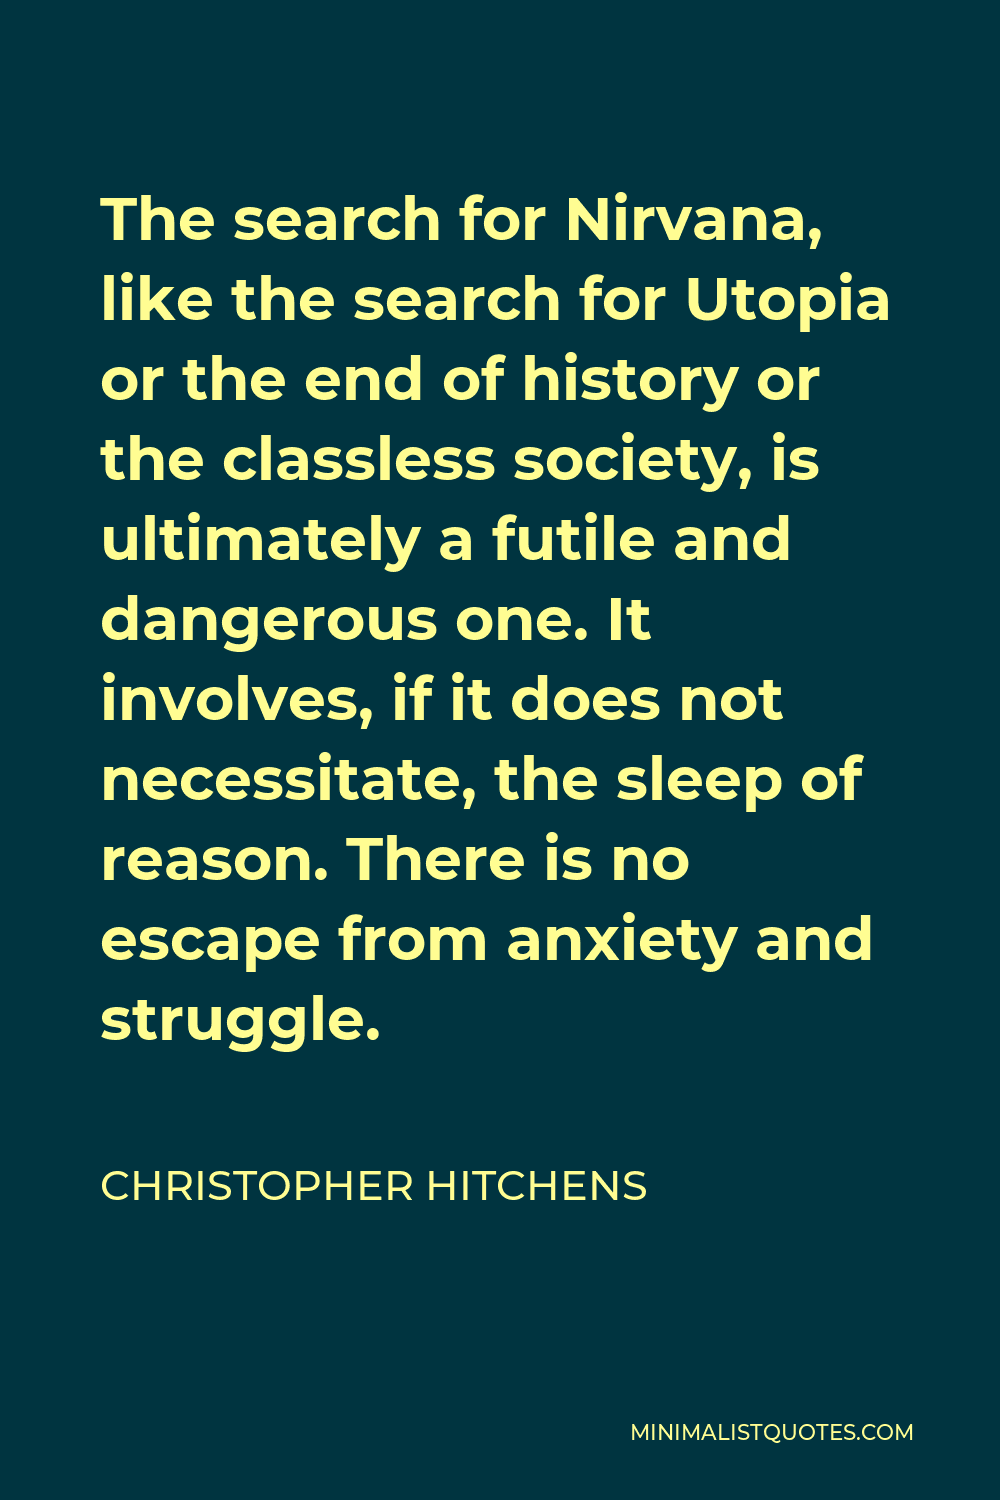 Christopher Hitchens Quote - The search for Nirvana, like the search for Utopia or the end of history or the classless society, is ultimately a futile and dangerous one. It involves, if it does not necessitate, the sleep of reason. There is no escape from anxiety and struggle.